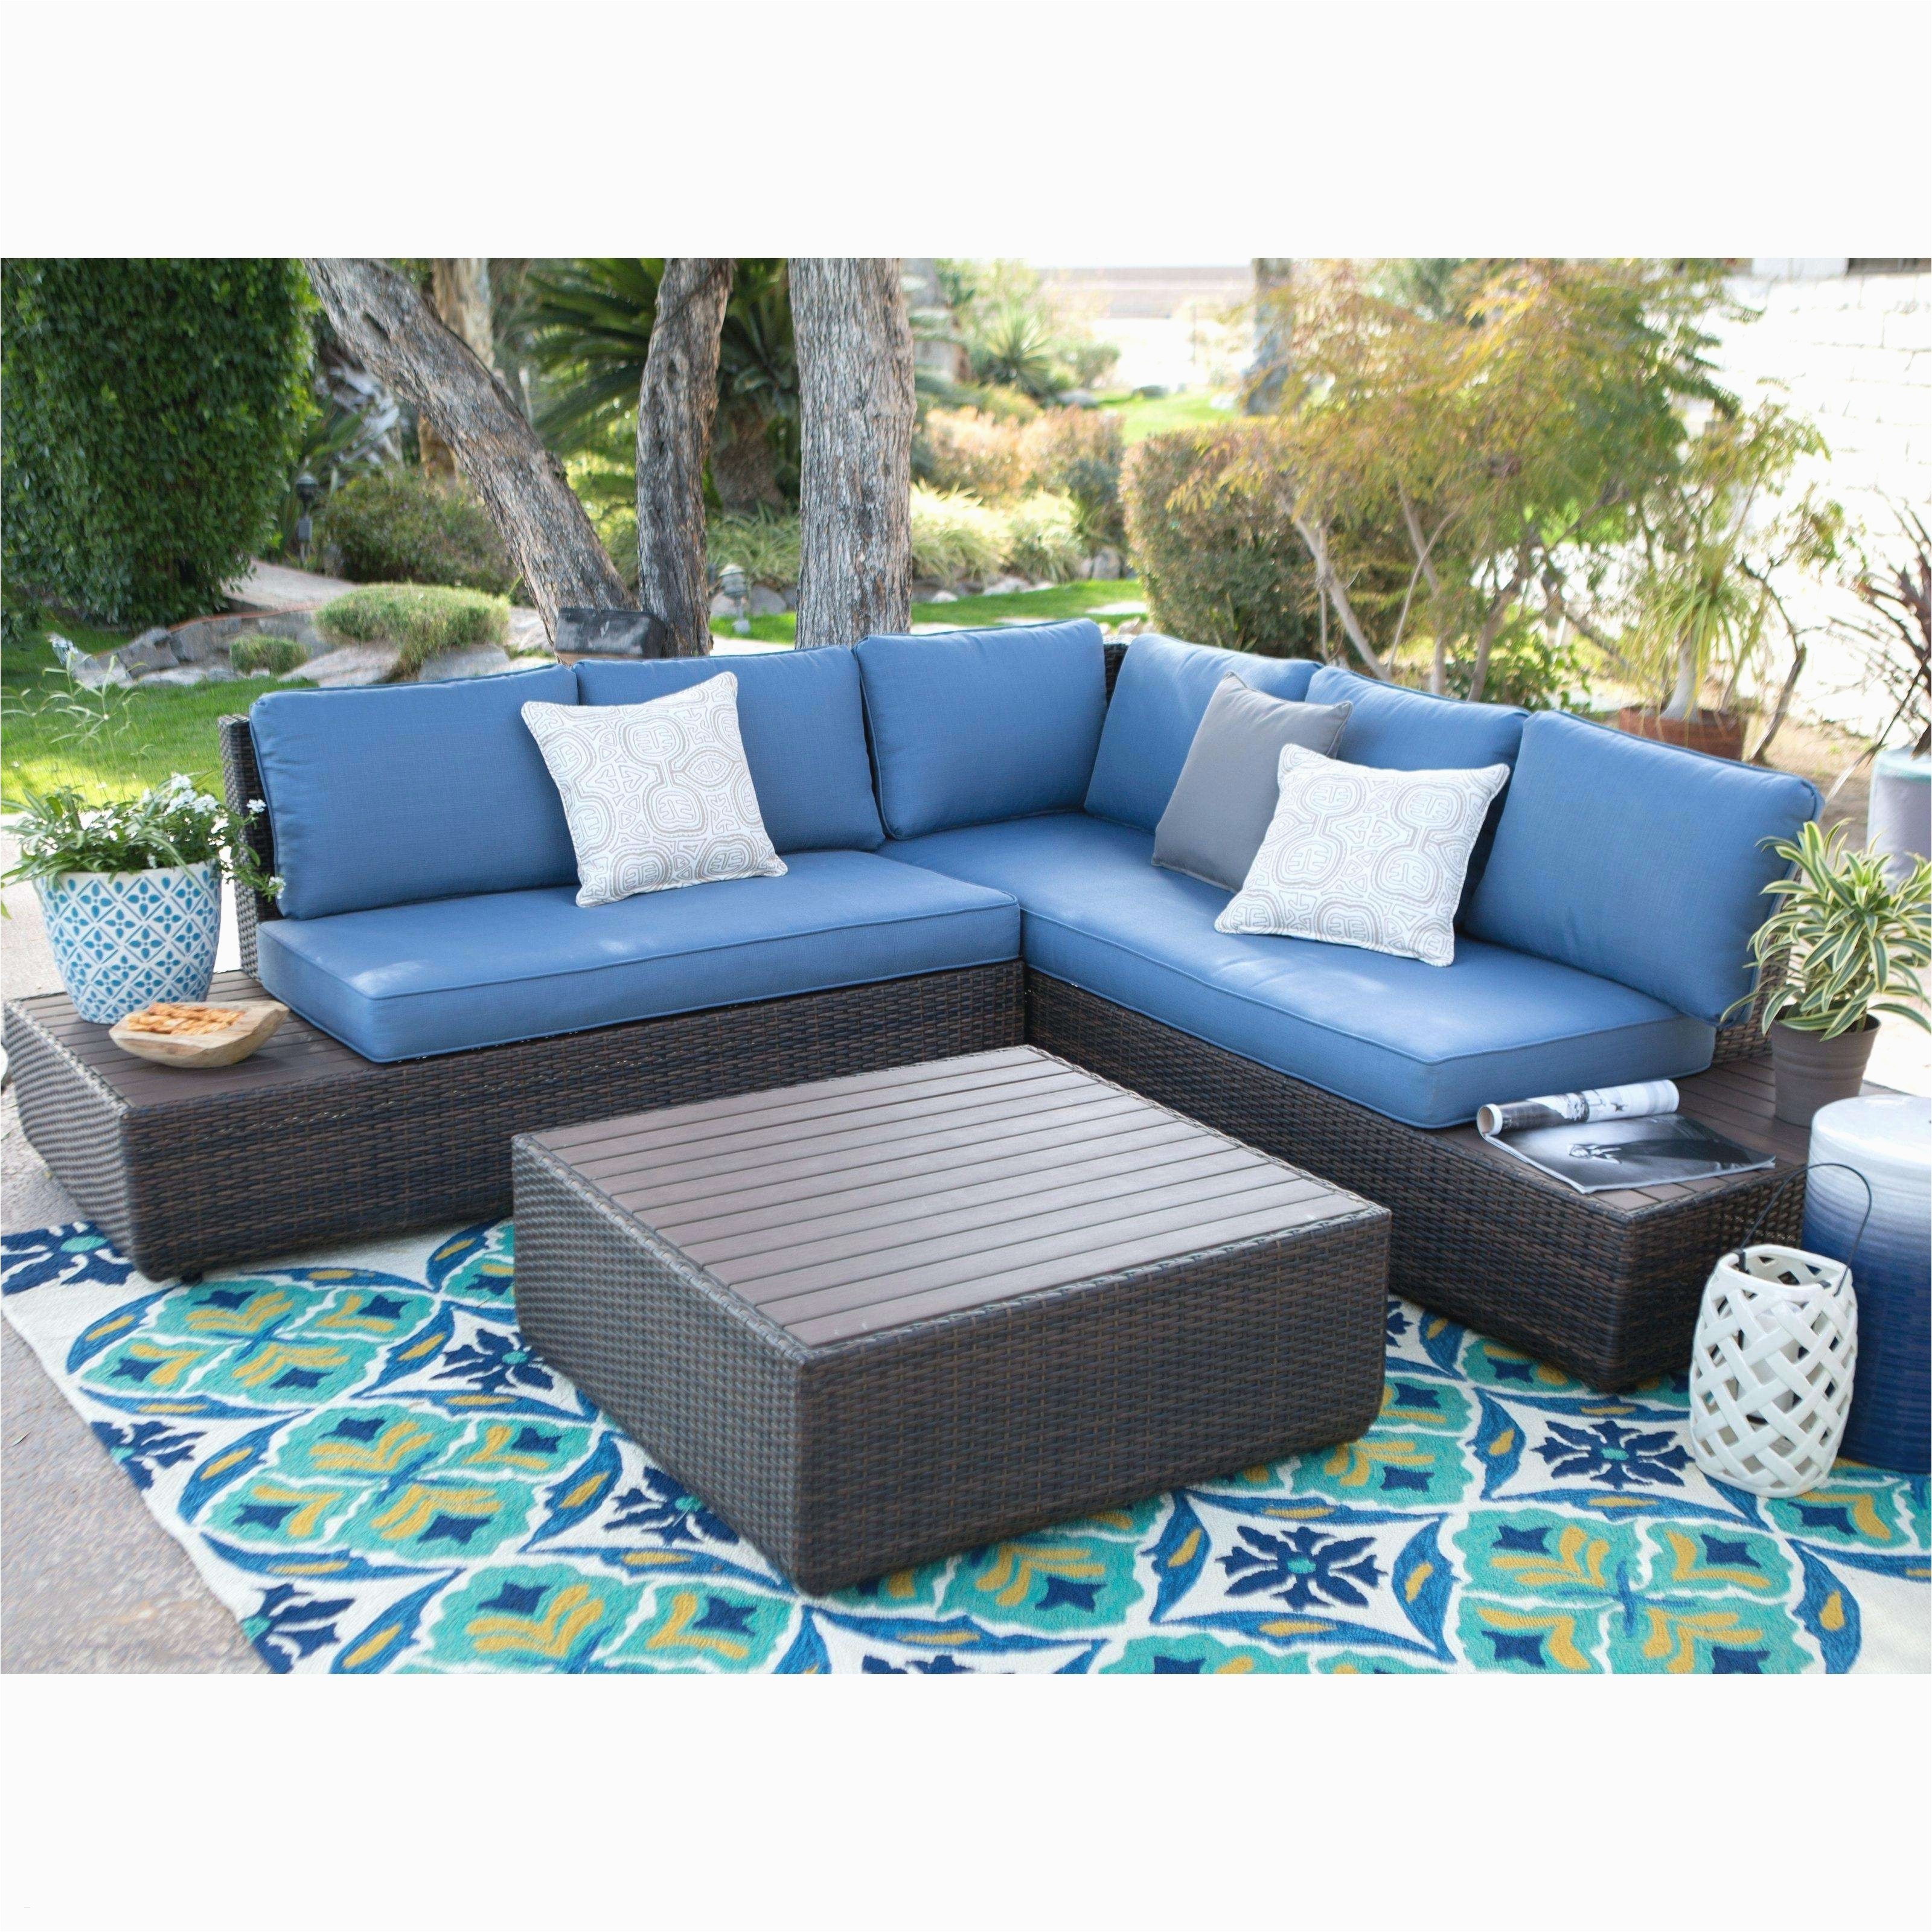 affordable outdoor furniture inspirational wicker outdoor sofa 0d patio chairs sale replacement cushions ideas